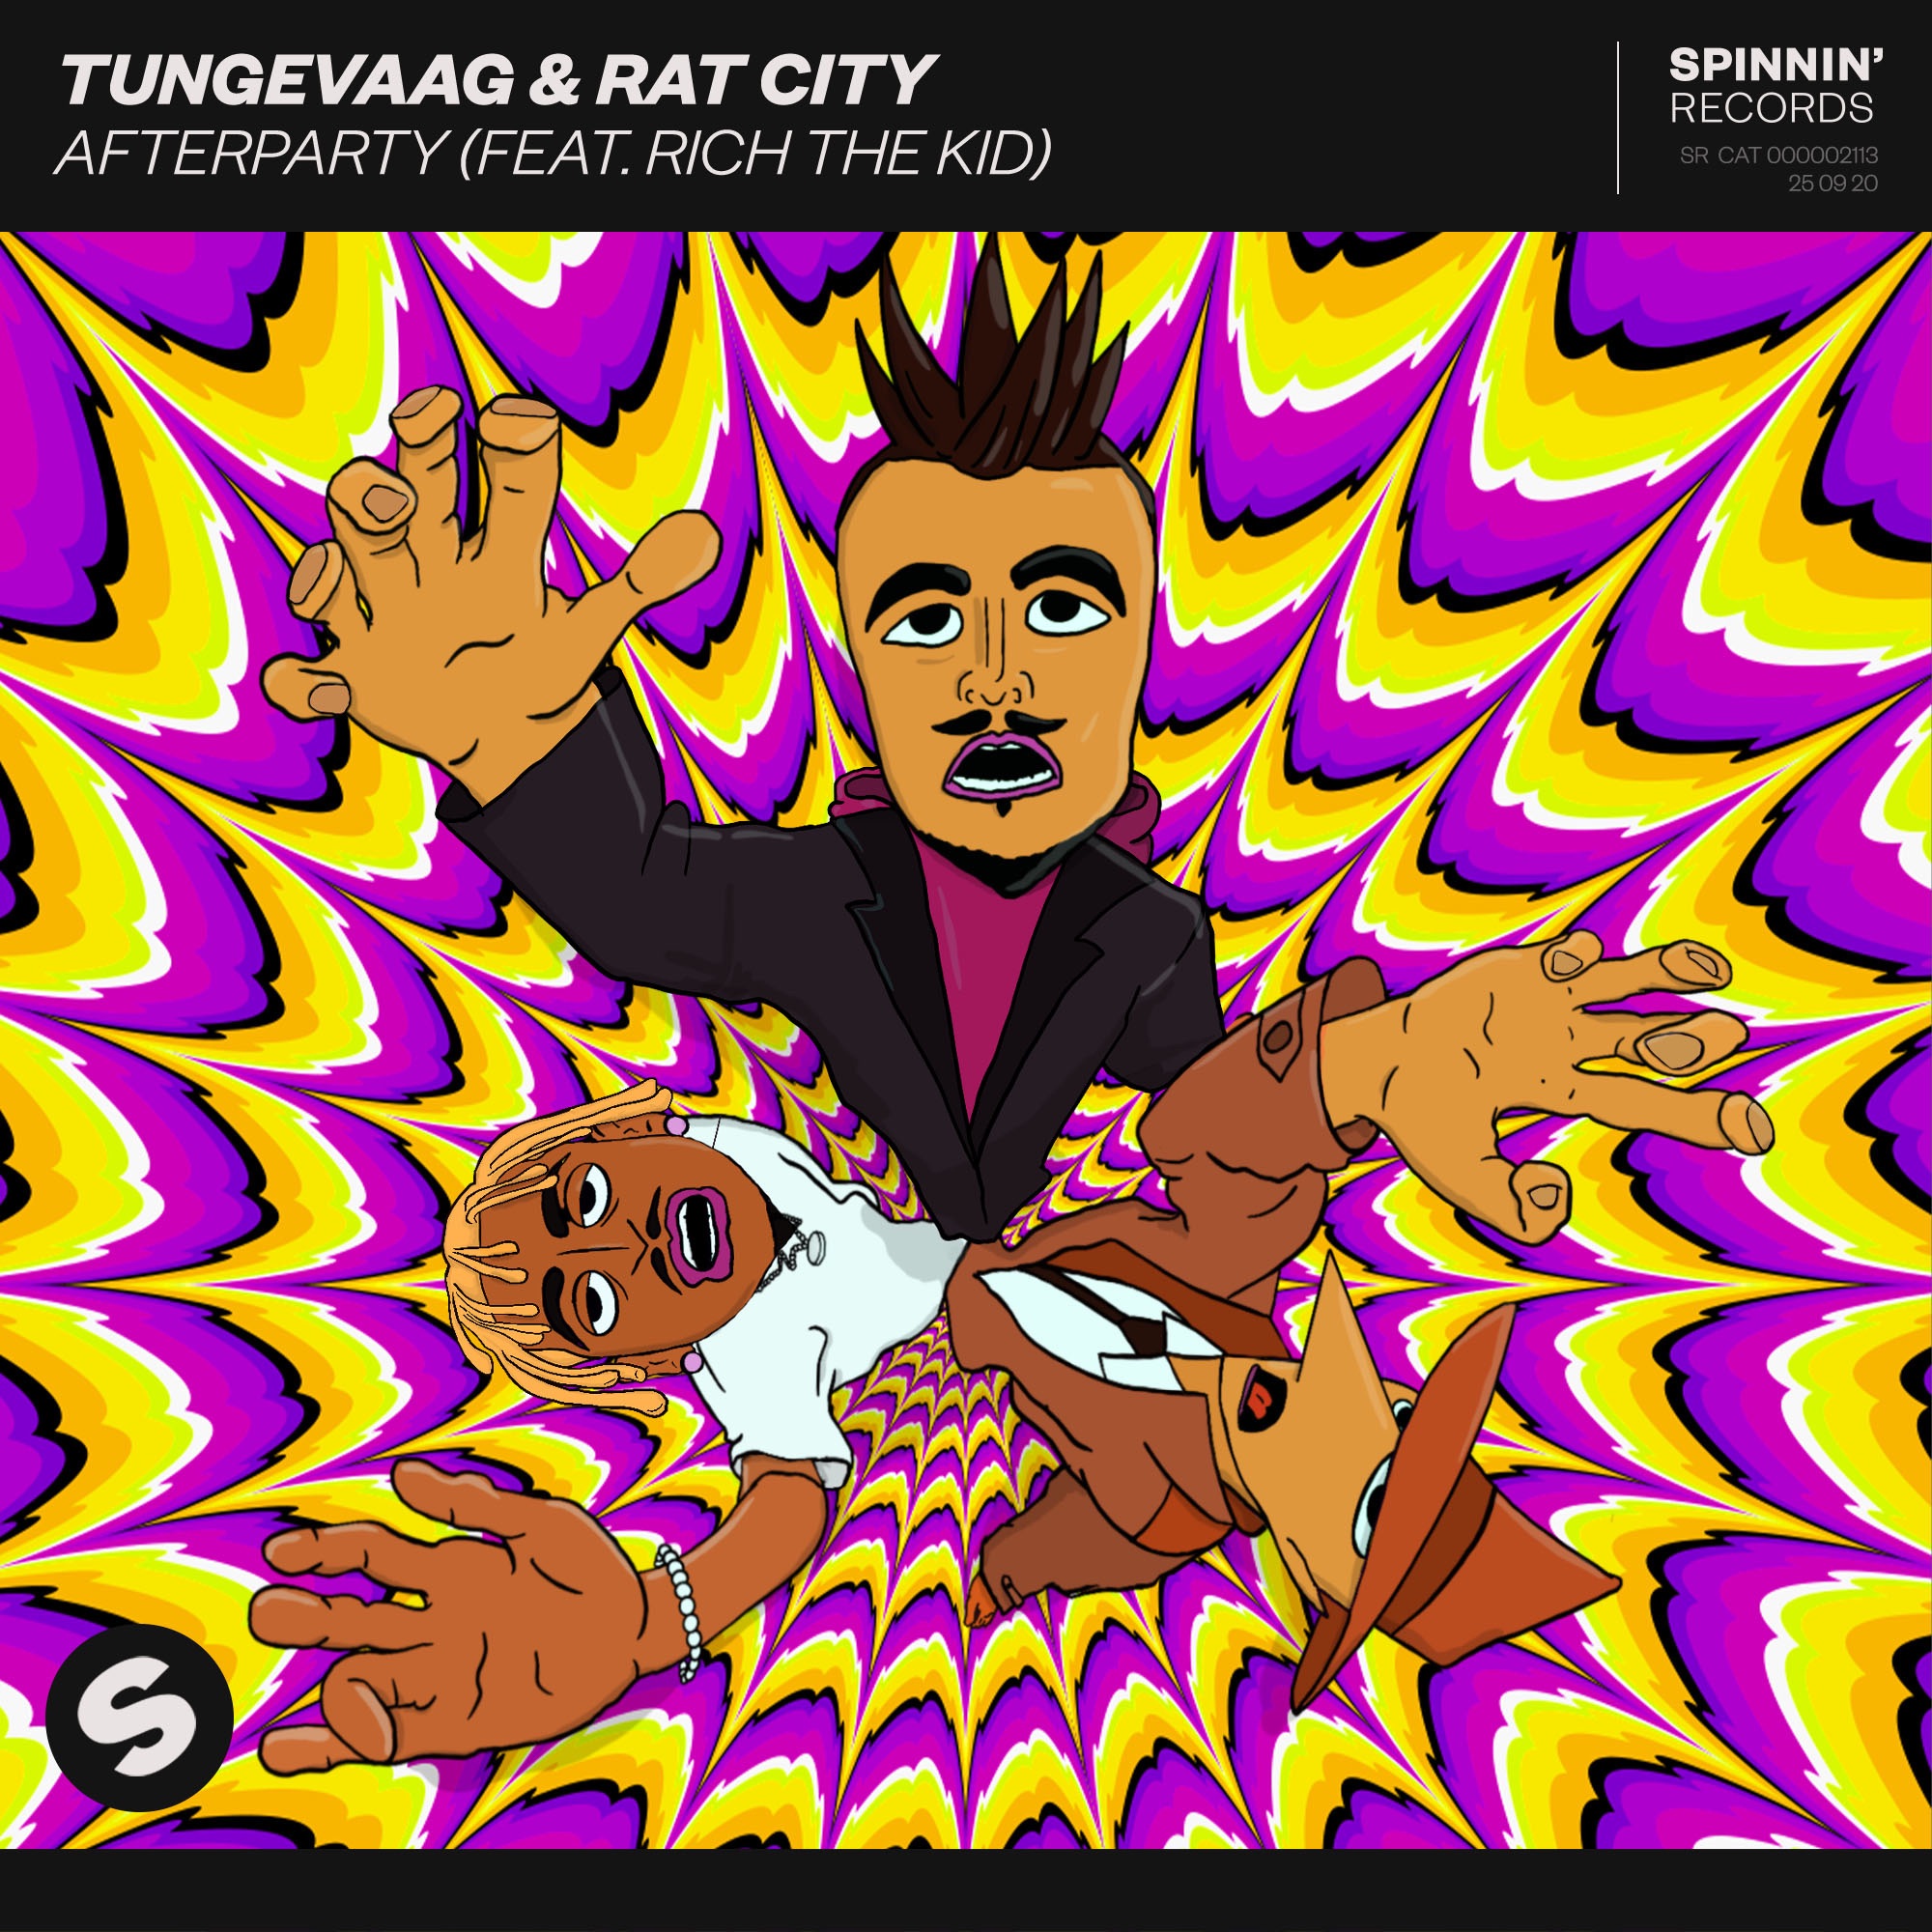 Tungevaag & Rat City - Afterparty (feat. Rich The Kid) - Single